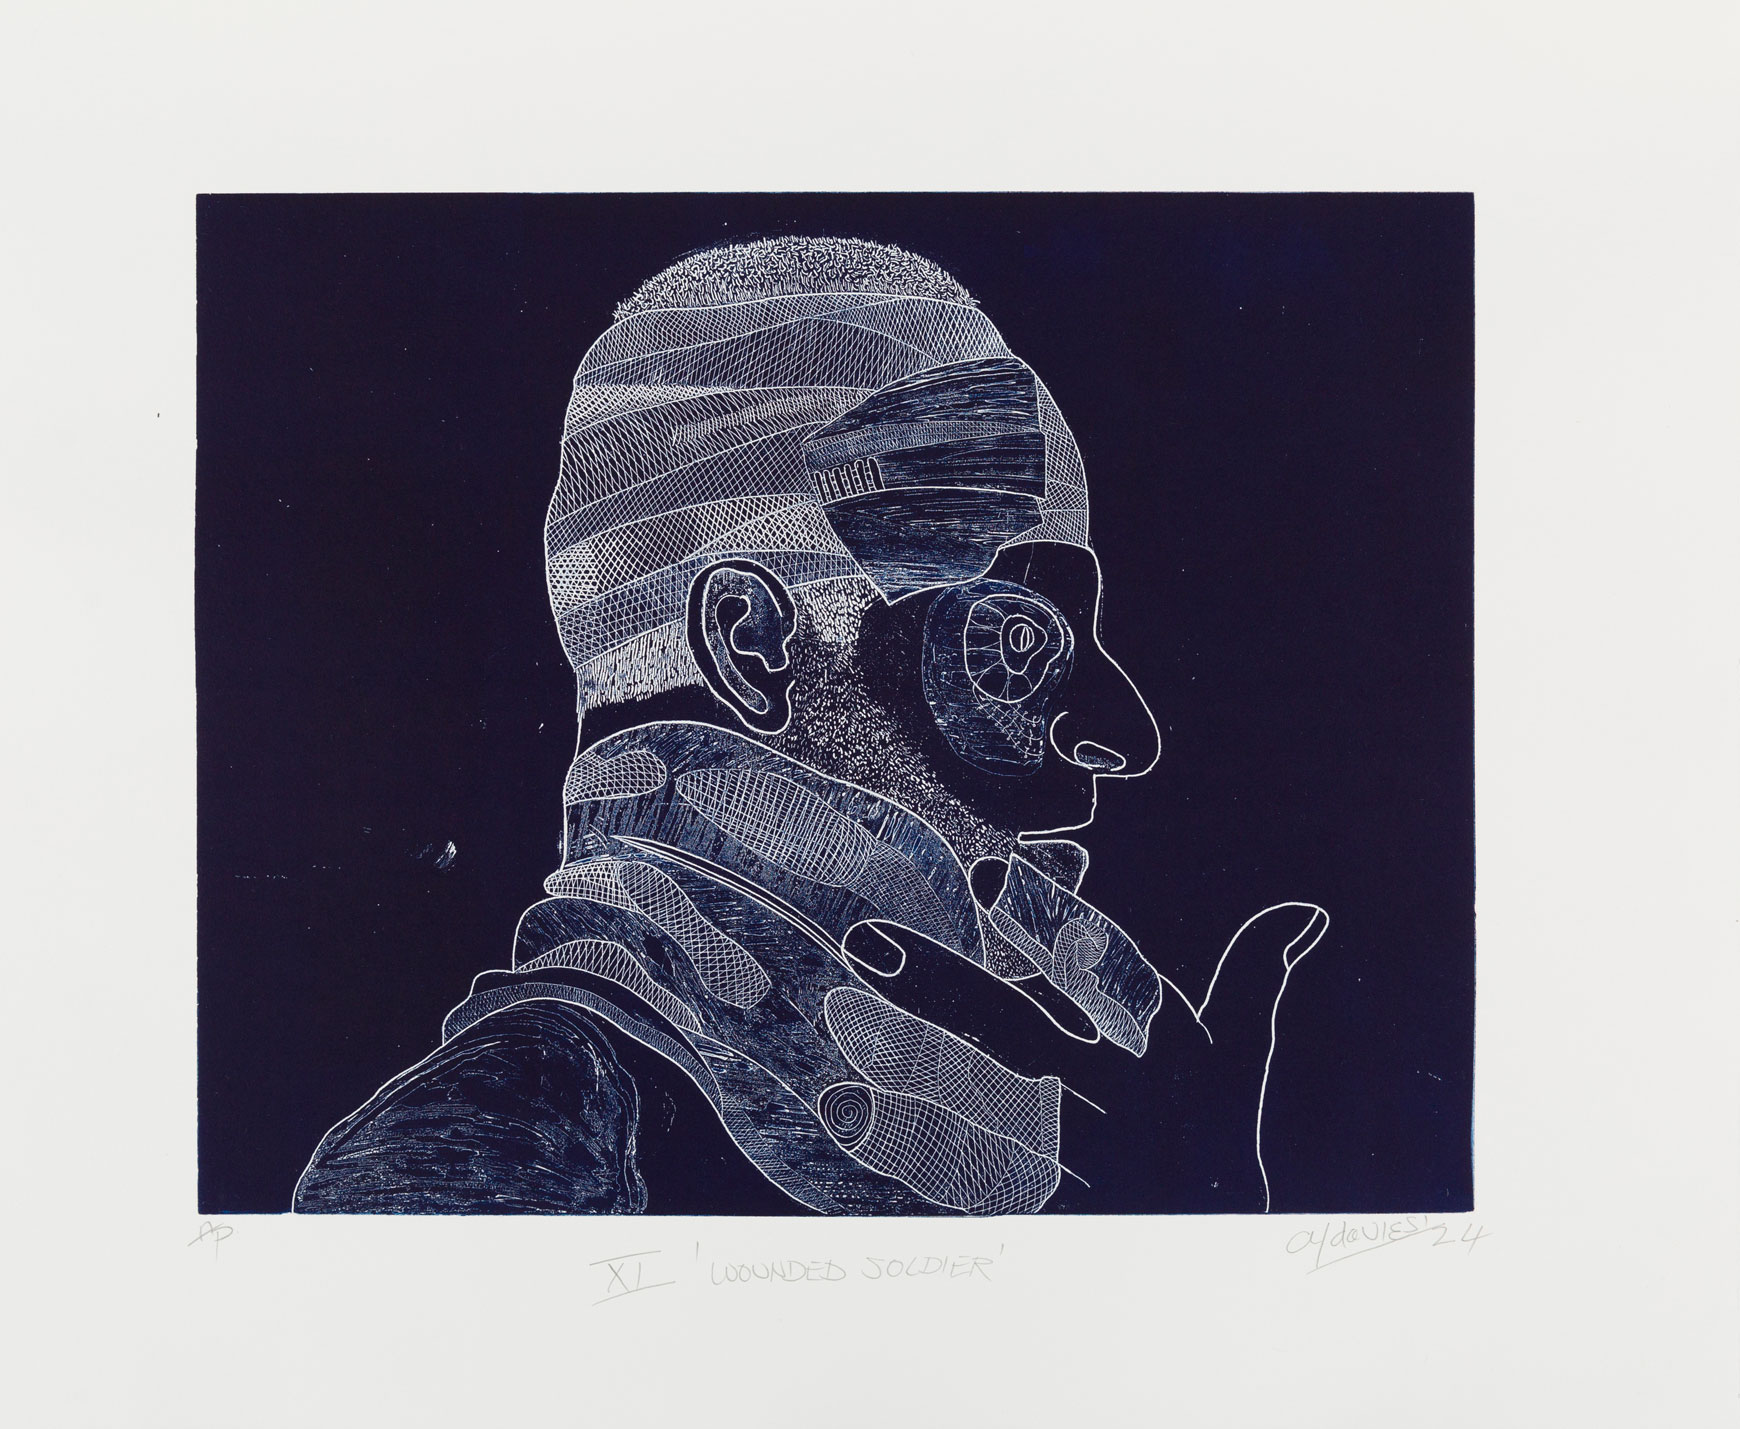 Printmaking image of an intricately etched wounded soldier on a dark blue background